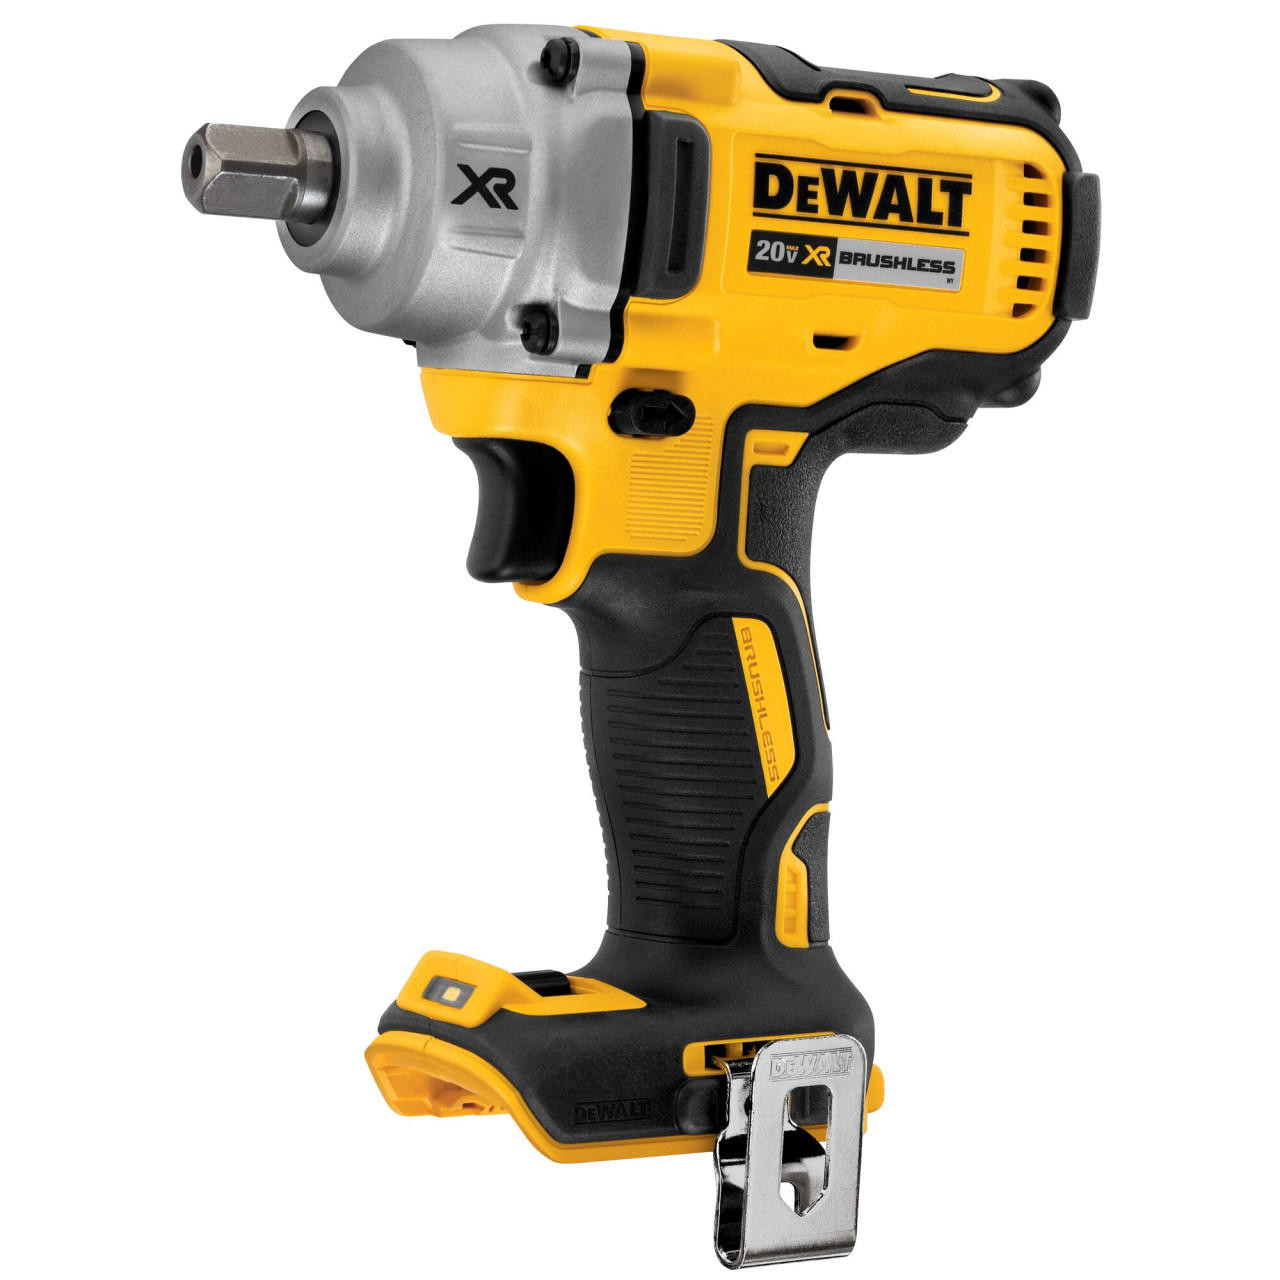 Dewalt DEWALT 20V Max Xr Cordless Impact Wrench Kit With Detent Pin Anvil, 1/2-Inch, Tool Only DCF894B 